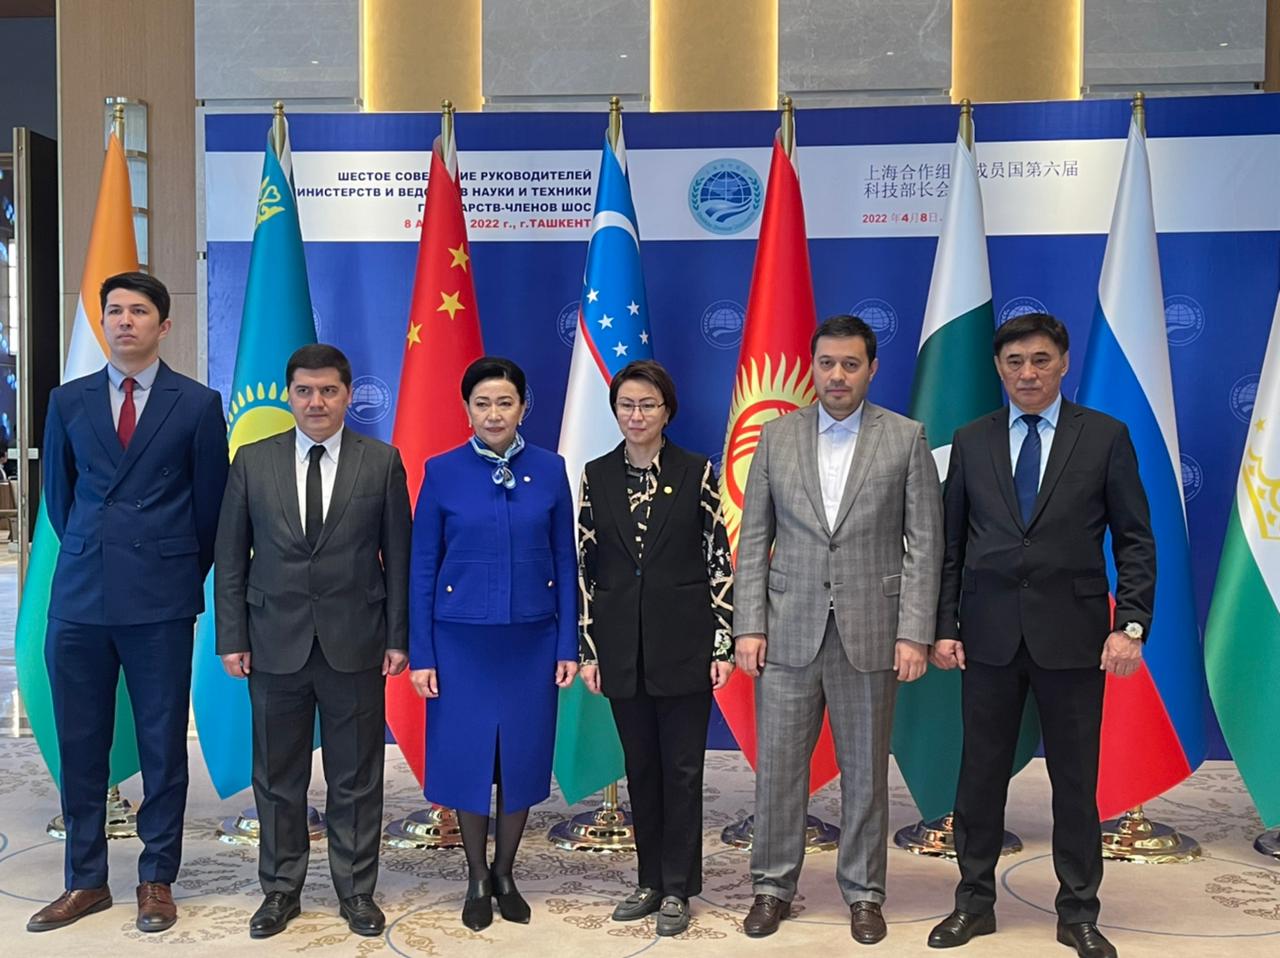 On April 7-8, 2022, they are on an official visit as part of the Kazakh delegation in the Republic of Uzbekistan